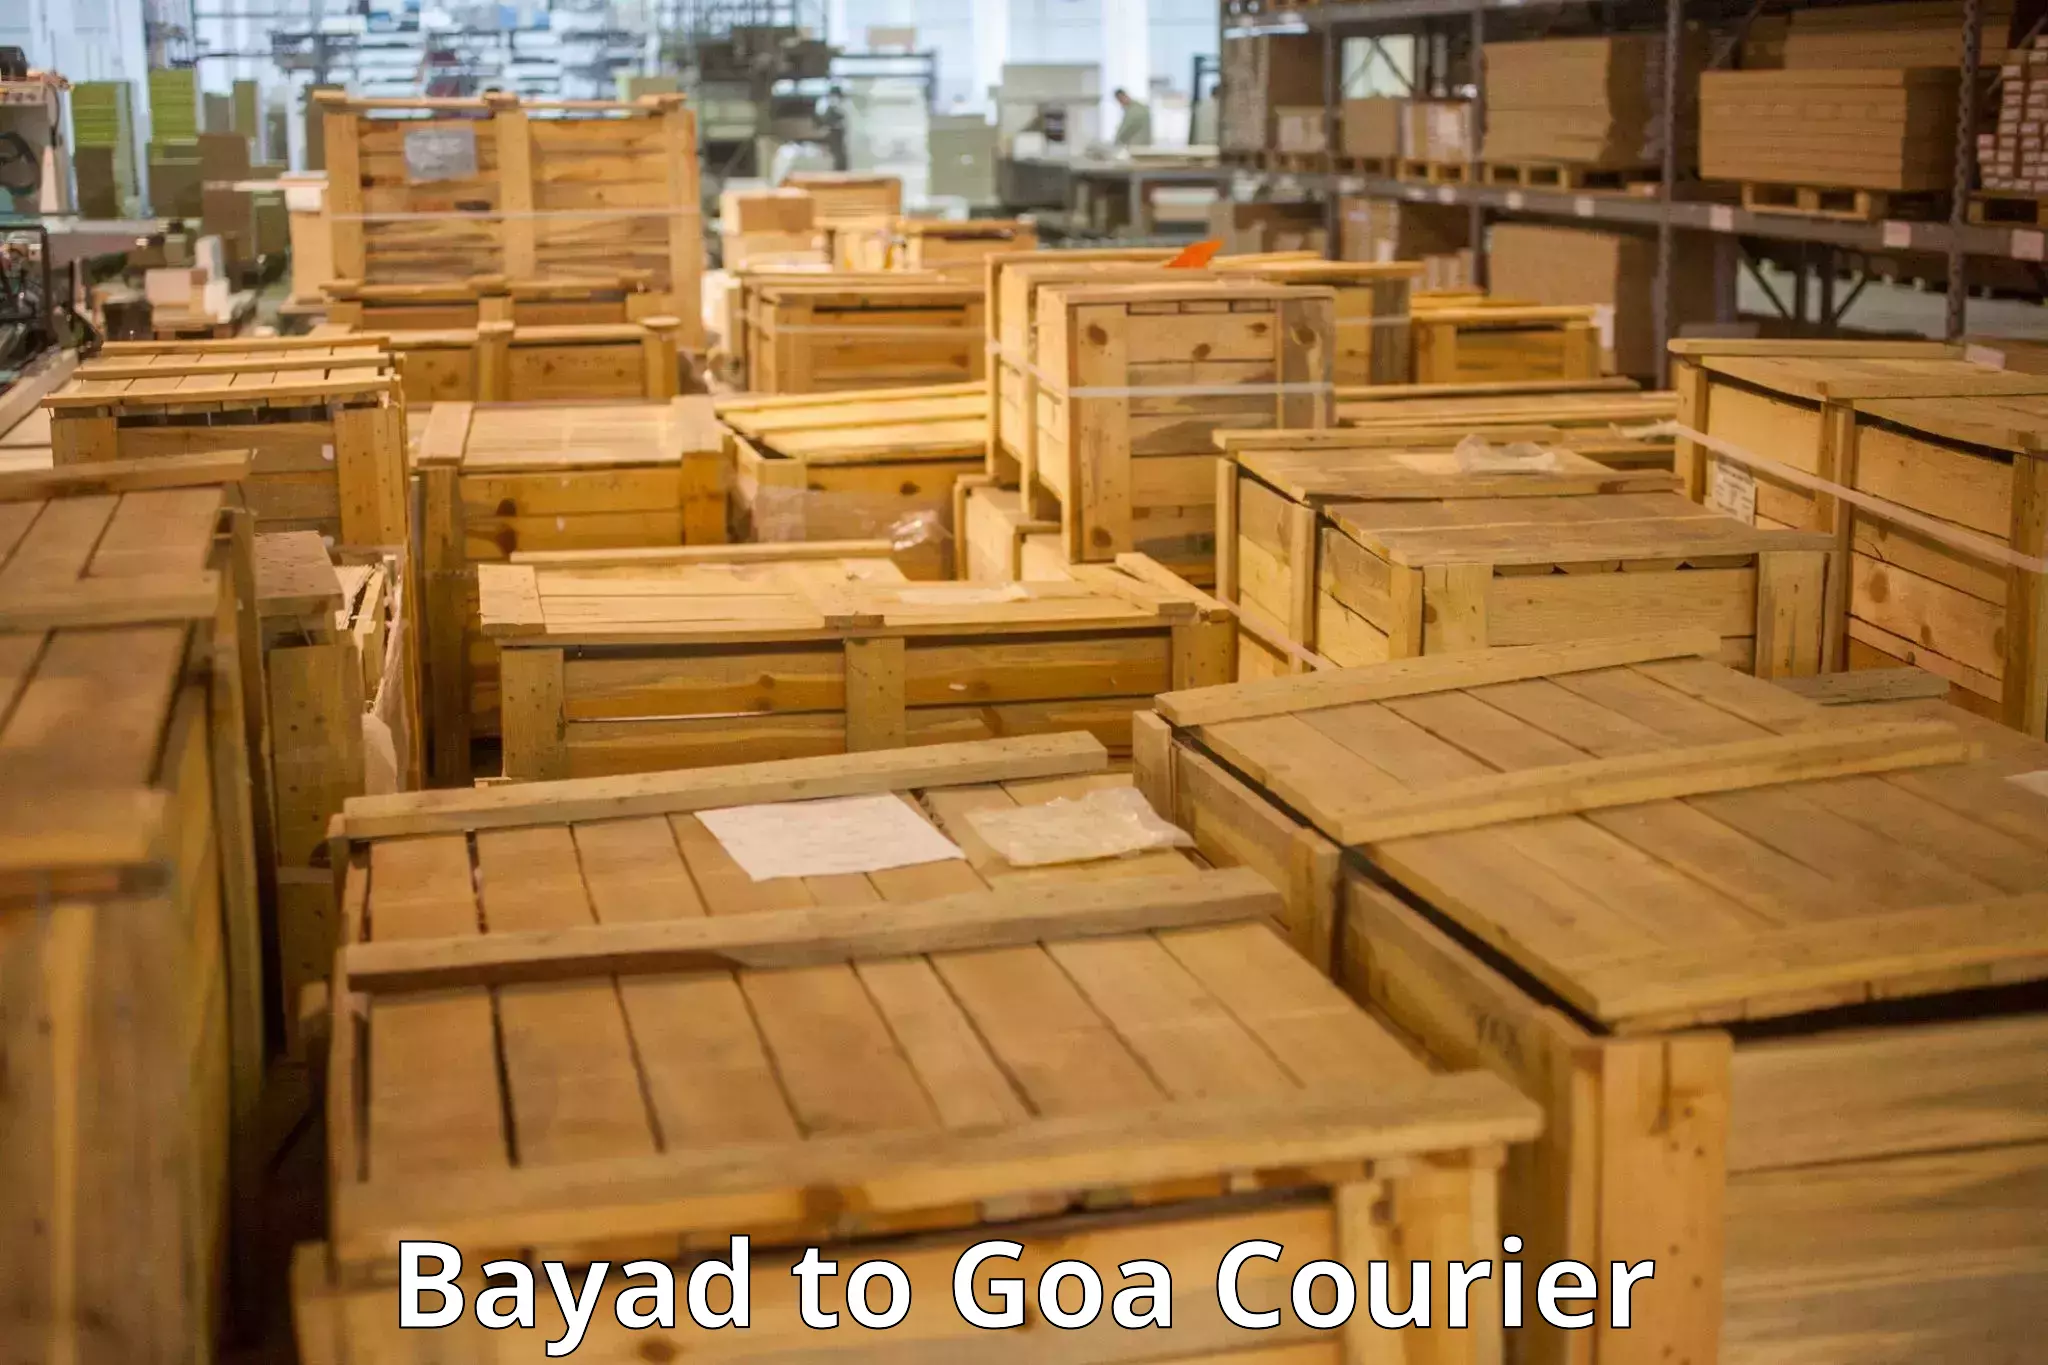 Luggage shipment specialists Bayad to South Goa